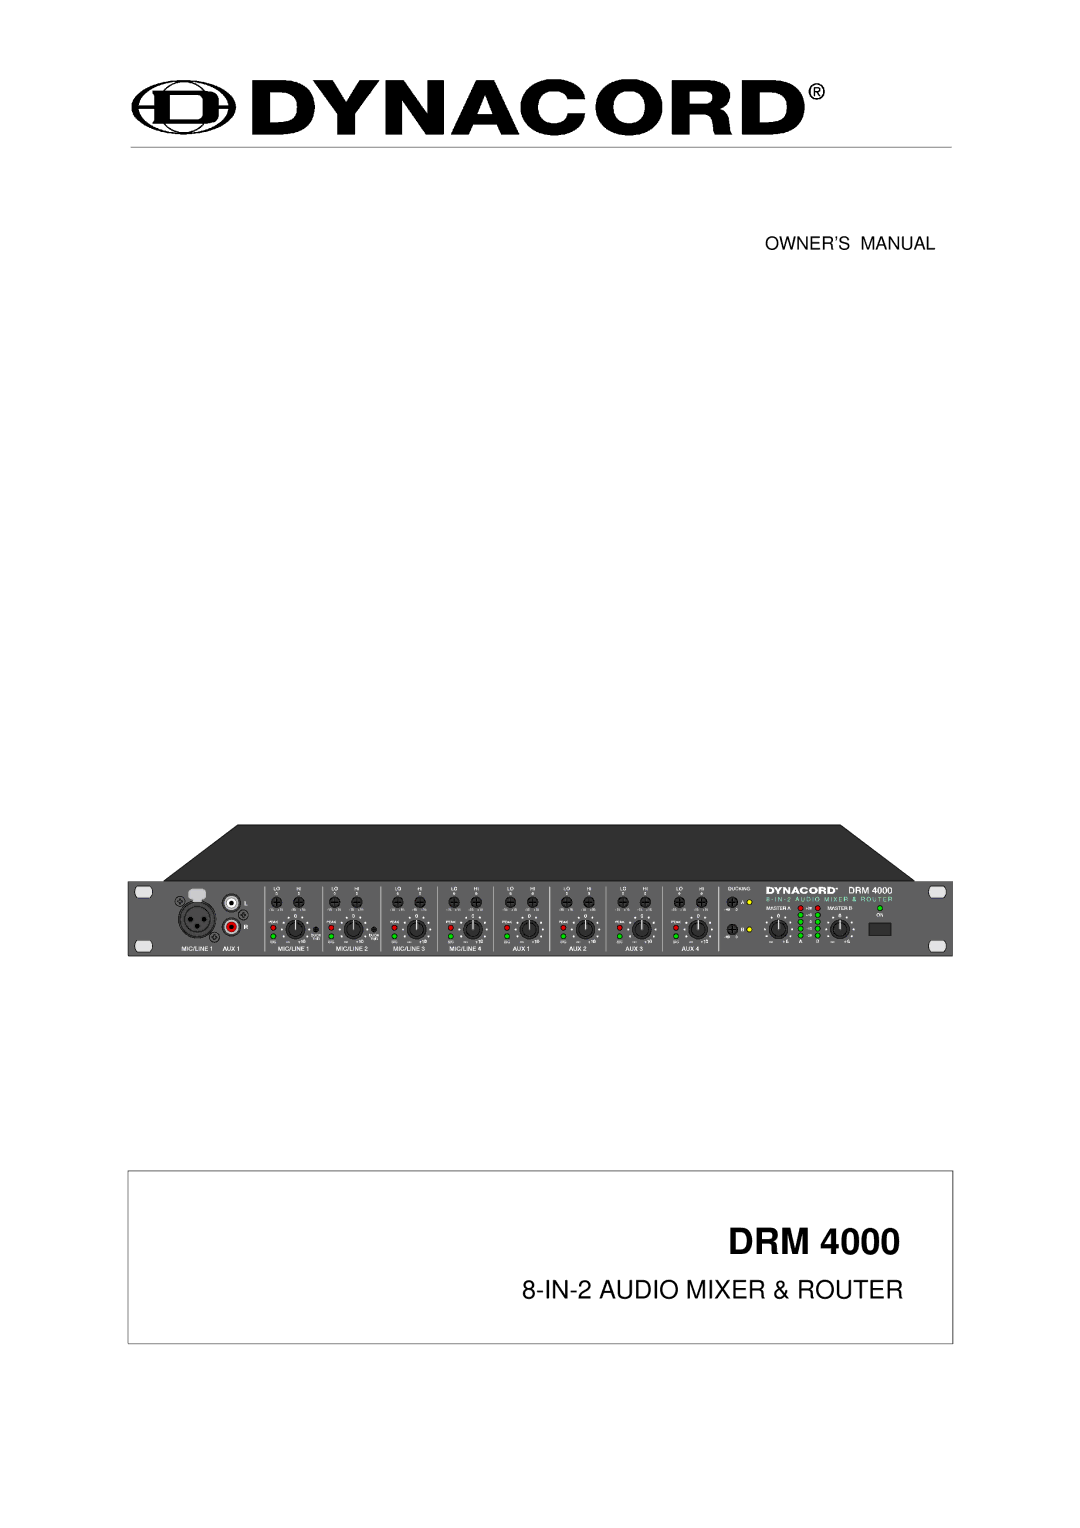 Dynacord DRM 4000 owner manual Drm 